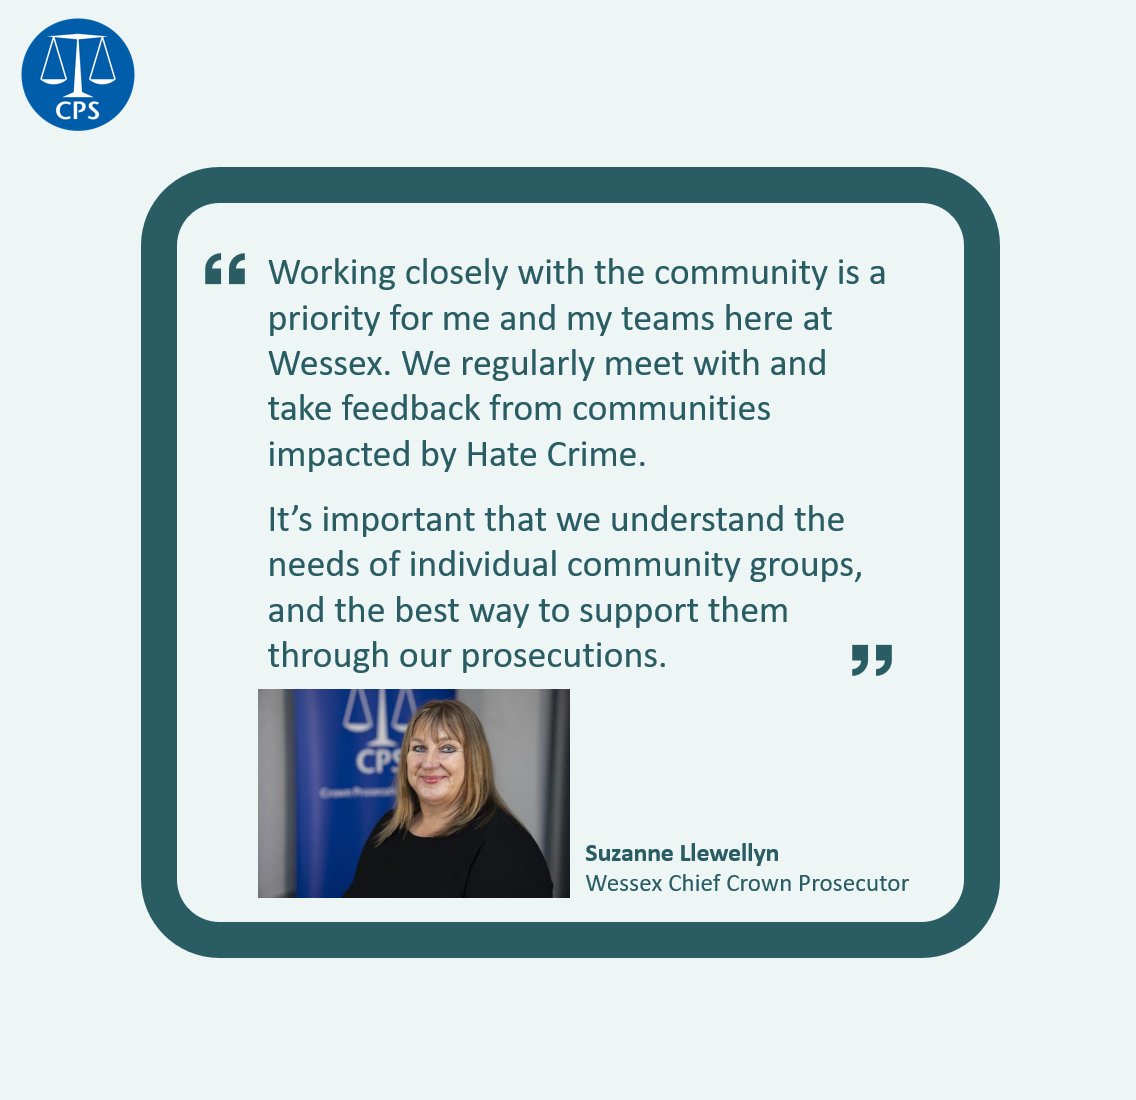 During Hate Crime Awareness Week we'll be introducing members of our team who serve the local Wessex community. CCP Suzanne Llewellyn leads Wessex in delivering justice for victims, ensuring perpetrators of Hate Crime are brought to justice where our two-stage legal test is met.